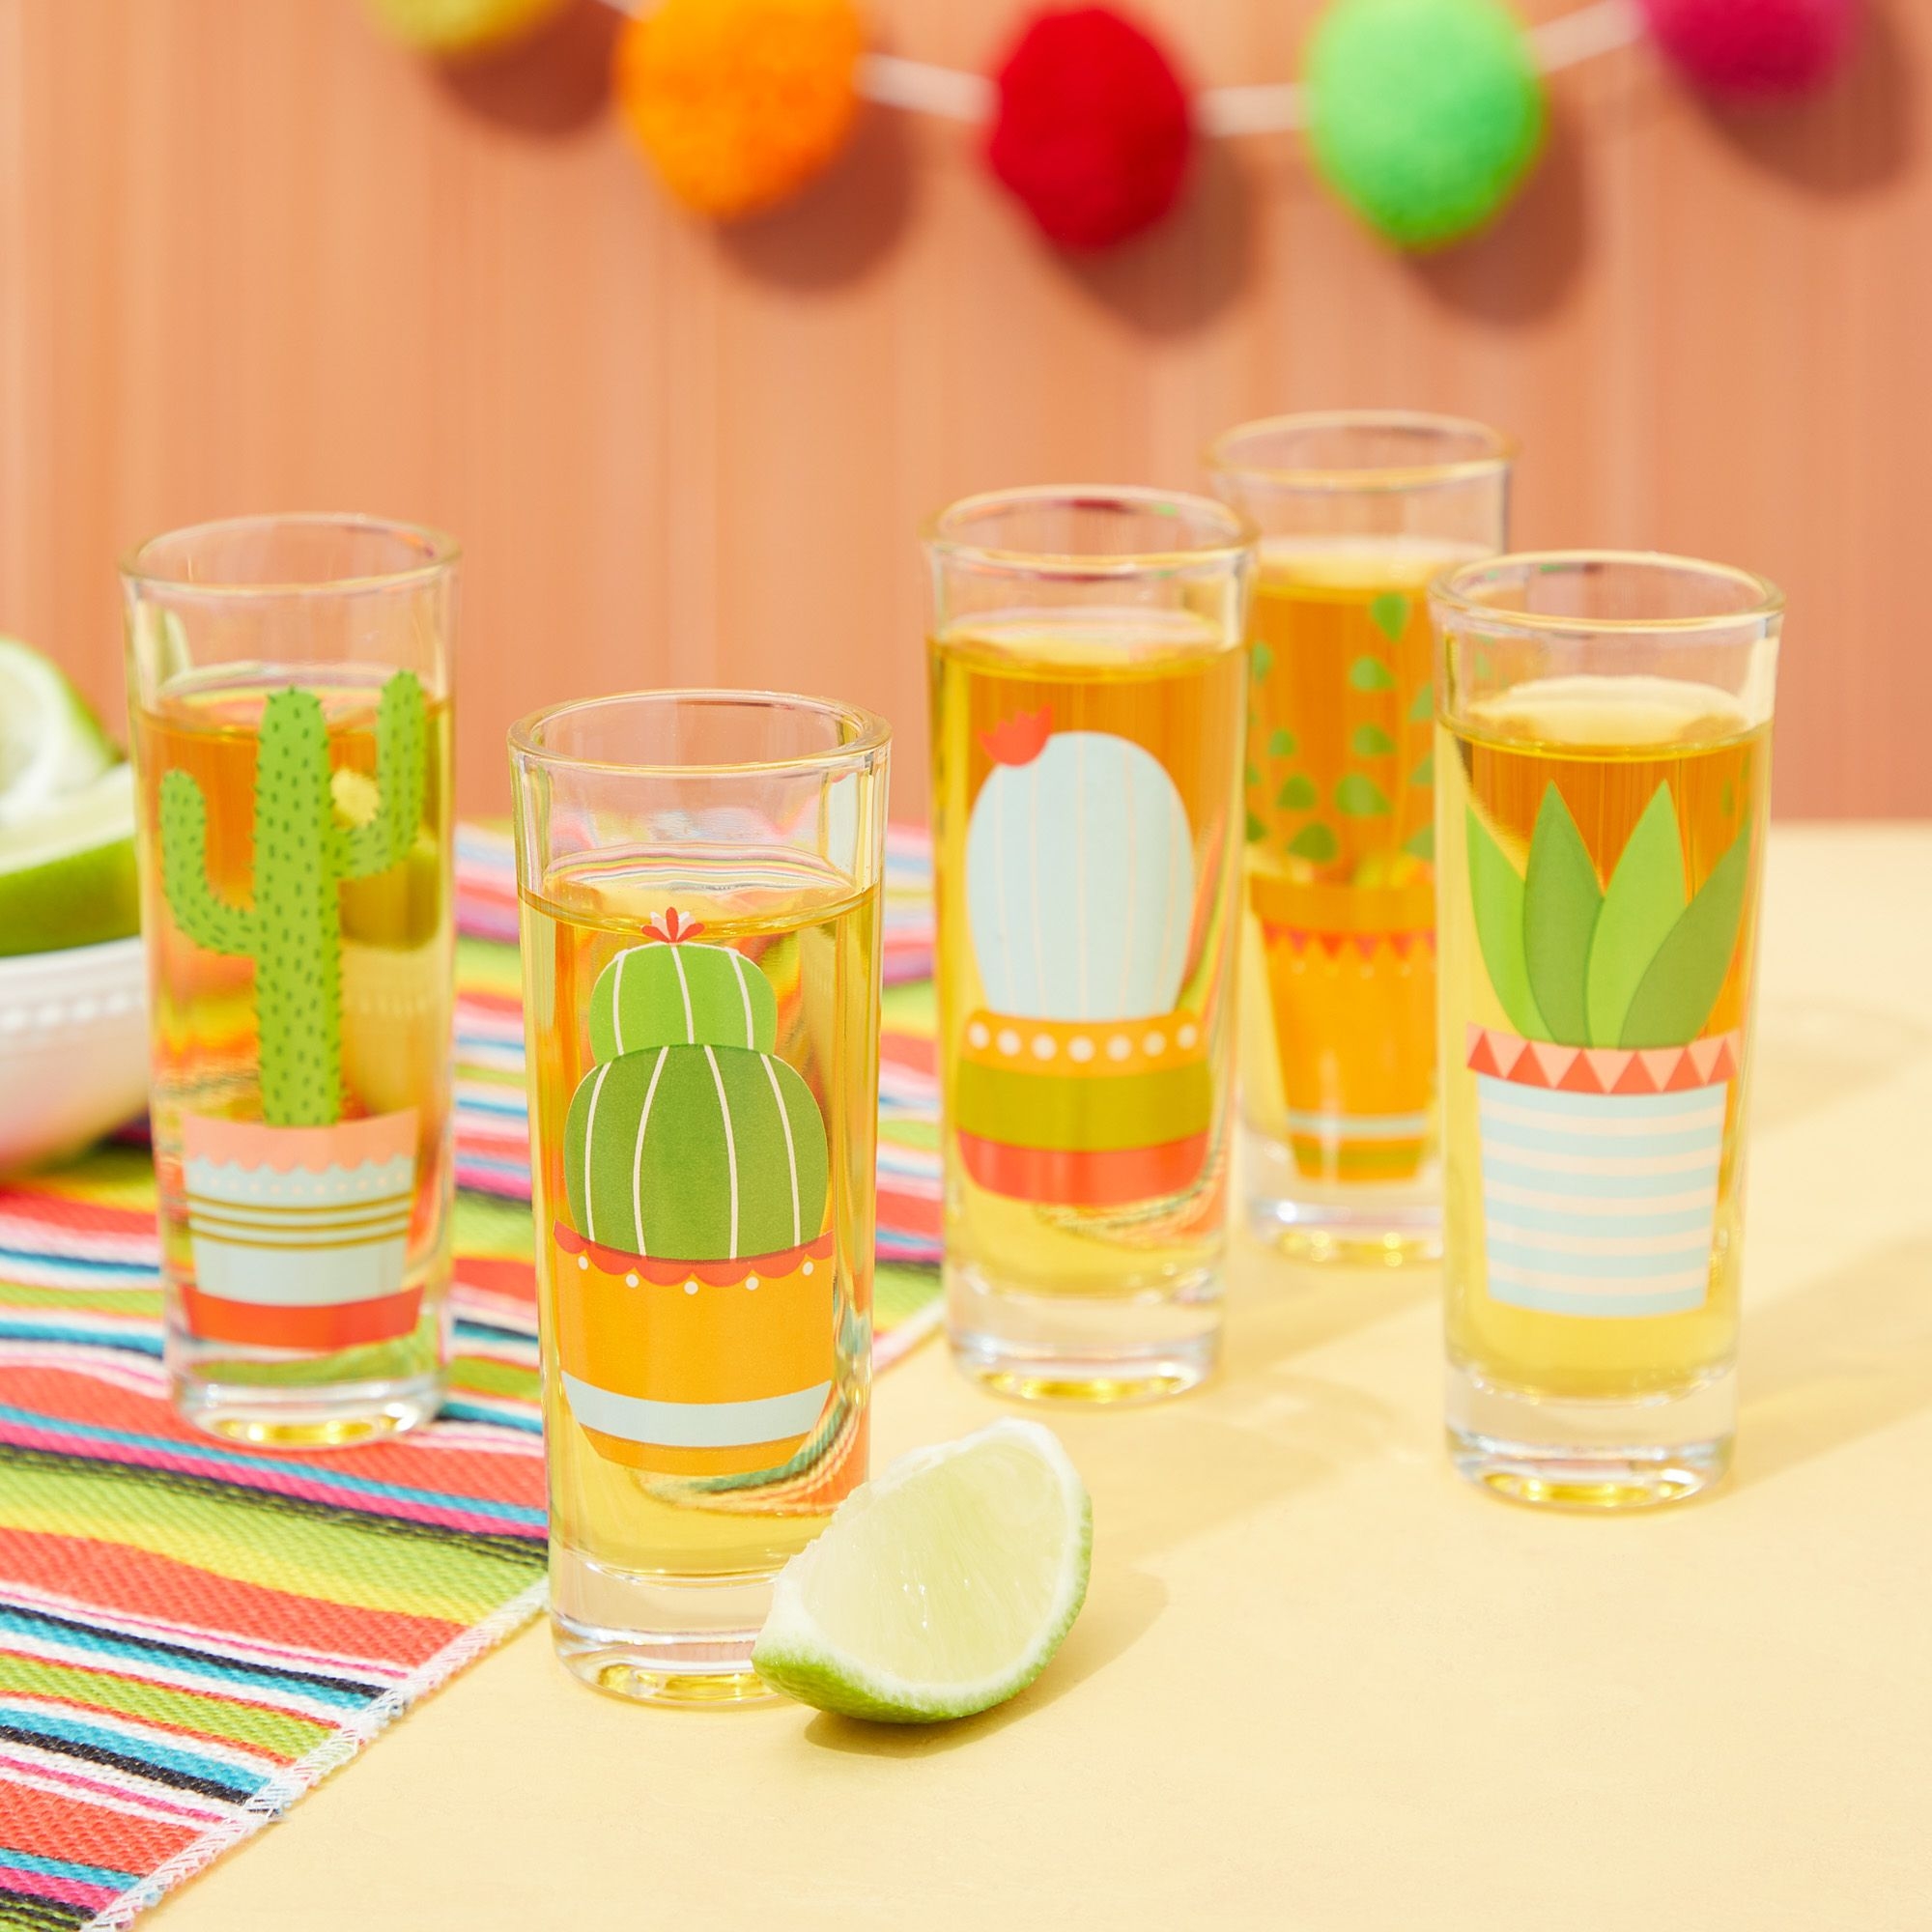 5 Pack Shot Glasses Set with Cactus Designs for Bachelorette, Fiesta Supplies, Western-Themed Party, Round, Decorative Shot Glasses with Heavy Base for Tequila, Whiskey, Vodka (2 oz) - image 2 of 10